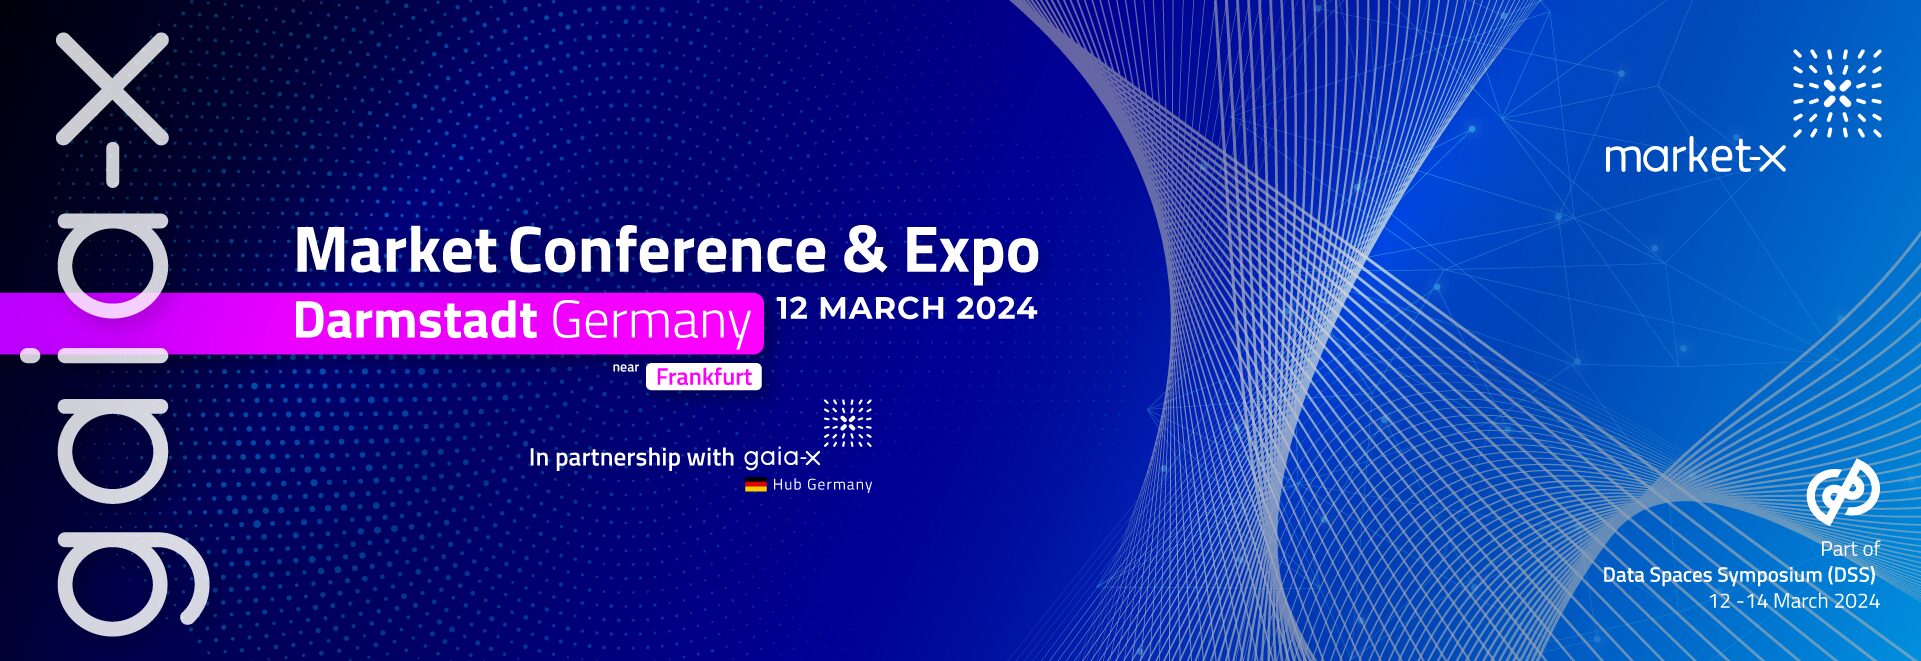 Market-X Conference & Expo